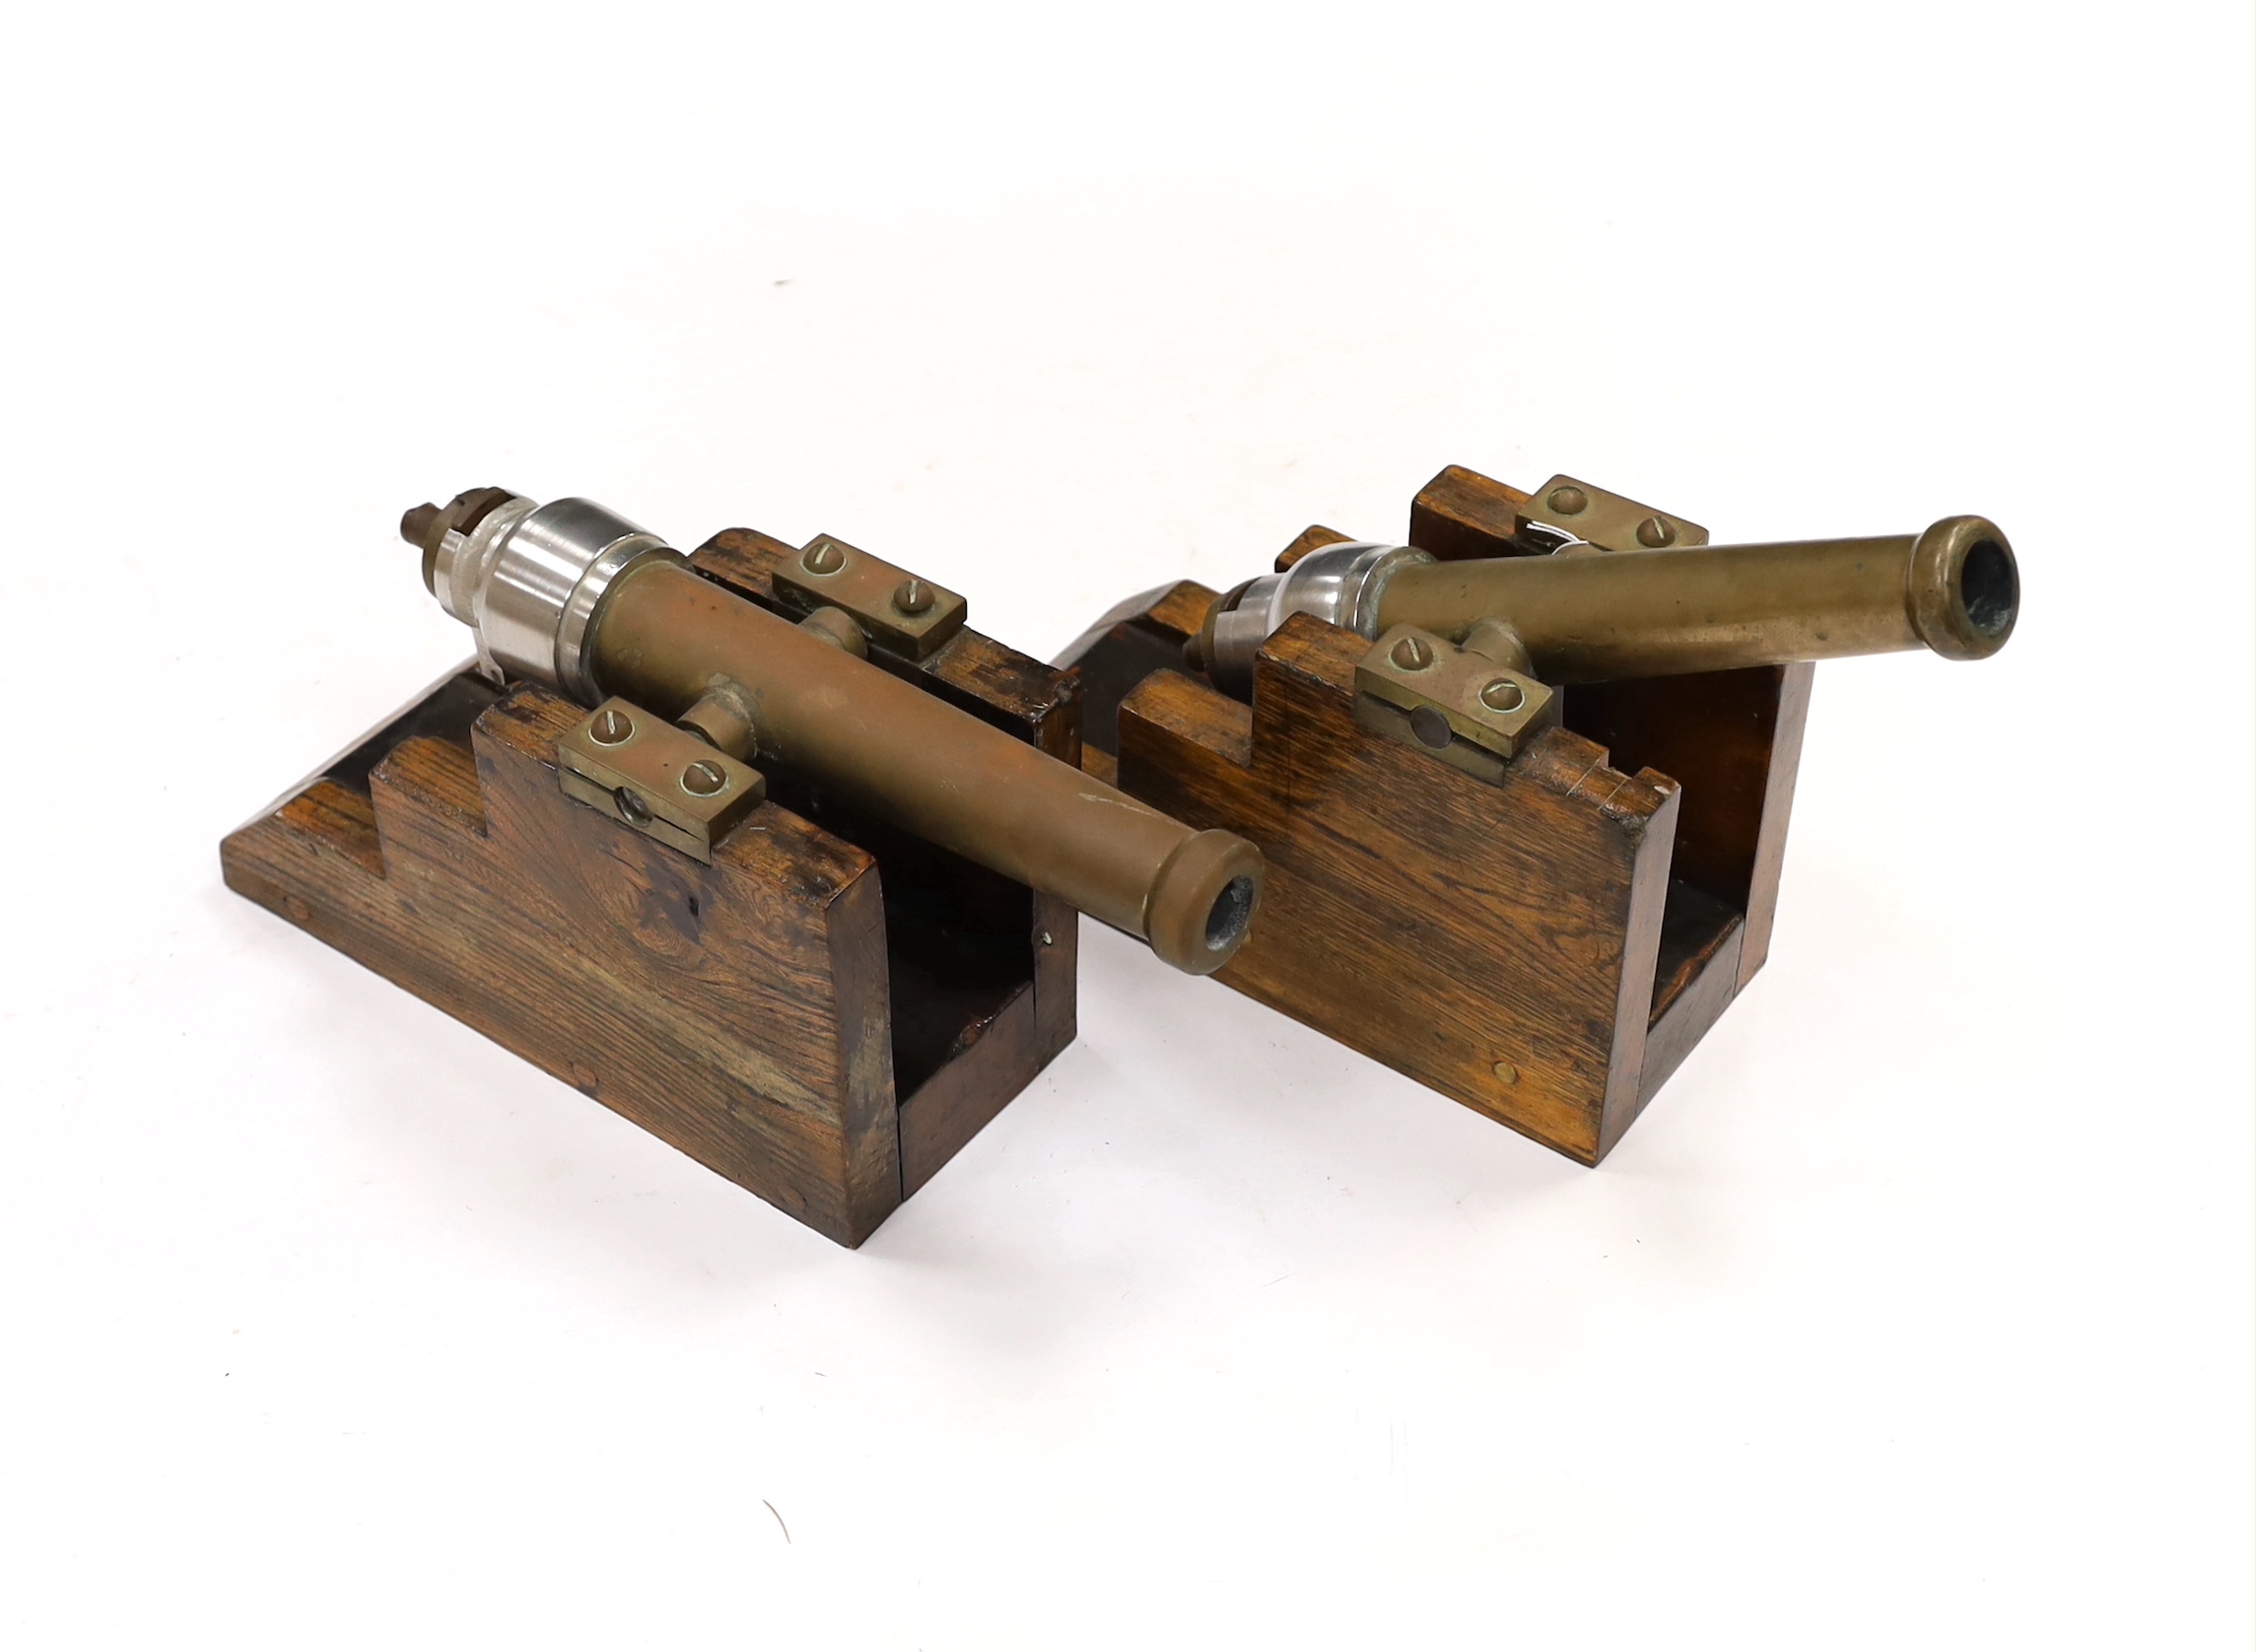 A near pair of breech loading brass and steel starting cannons, on elm stands, longest barrel 24.5cm